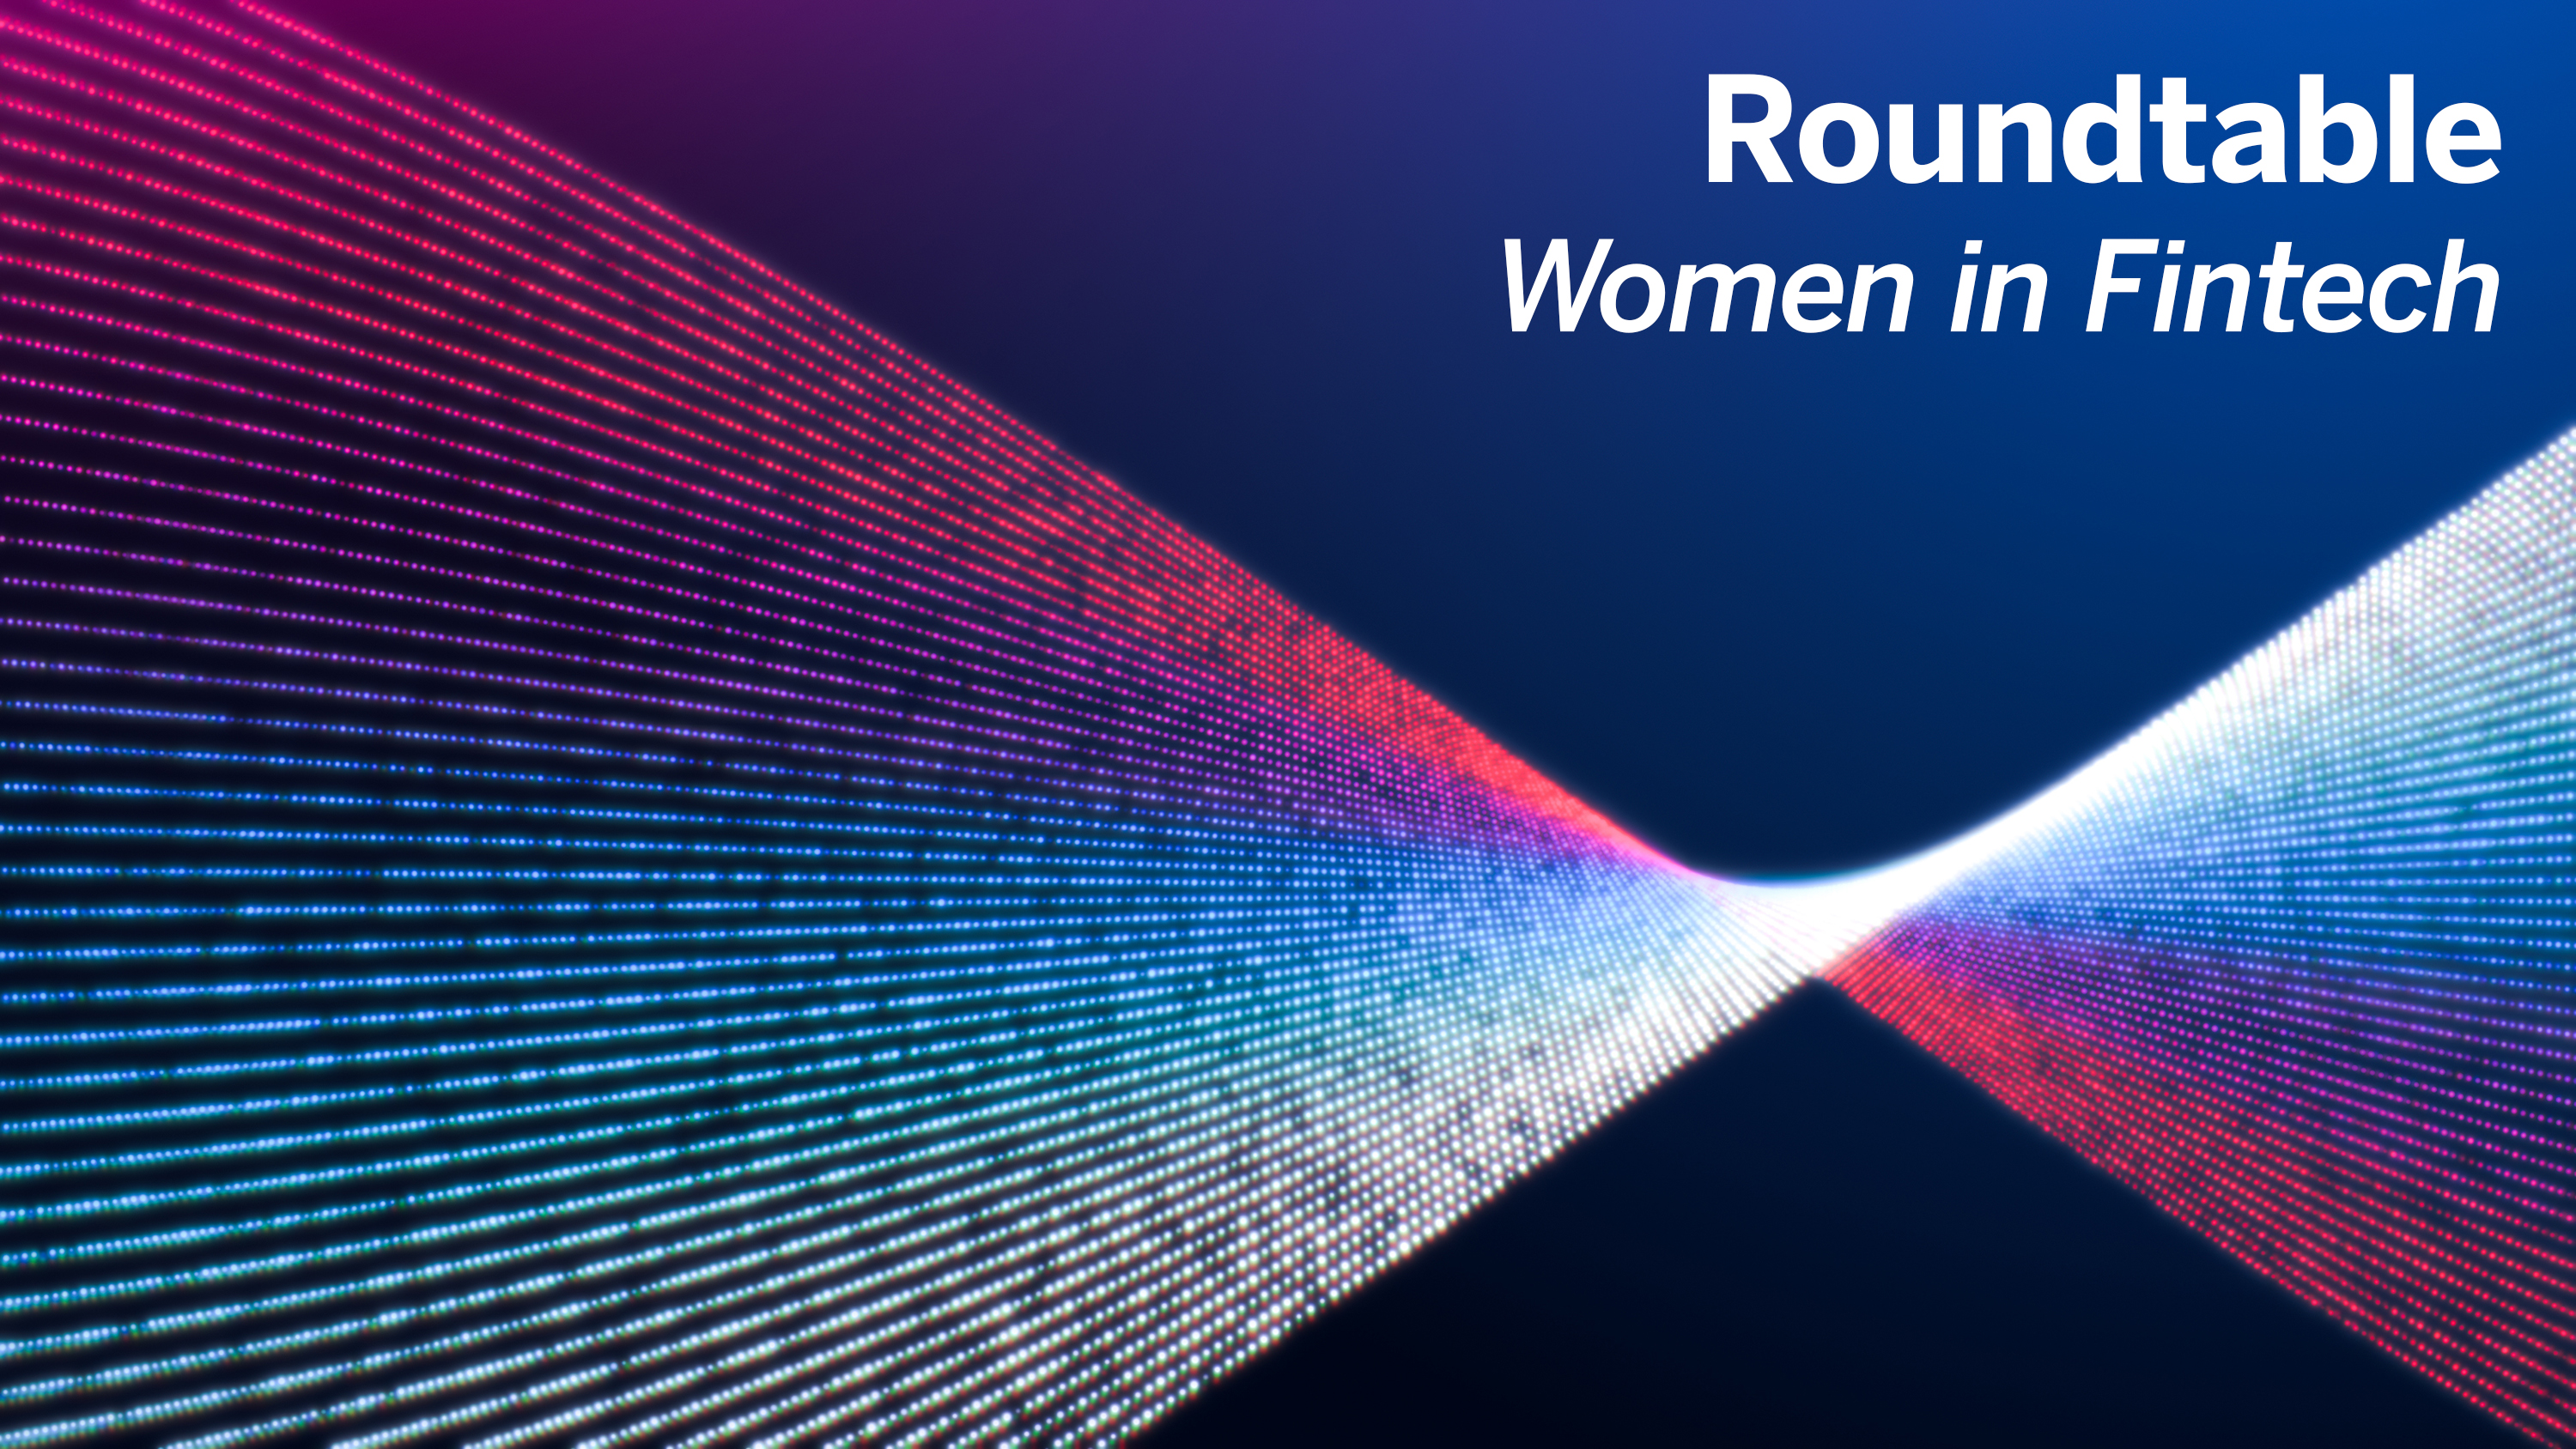 An abstract image of a twisted digital ribbon and the text 'Roundtable Women in Fintech'.